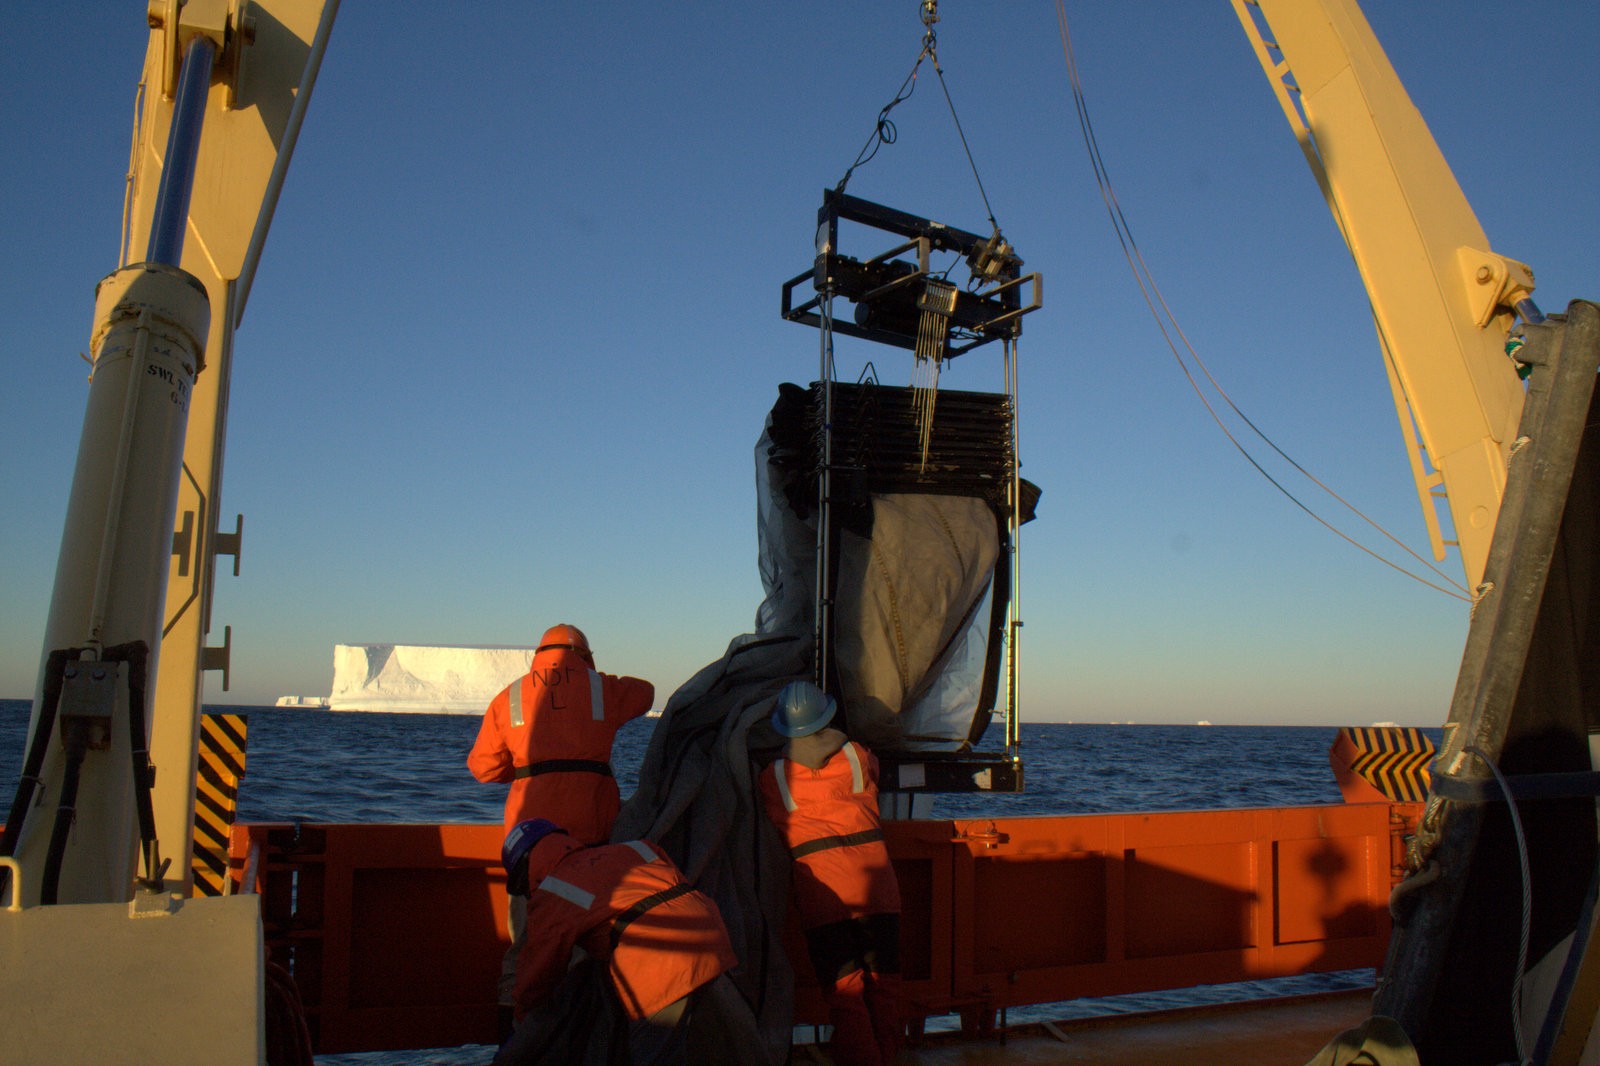 Scientists launch a Multiple Opening/Closing Net and Environmental Sensing System (MOCNESS) from the R/V Gould off the West Antarctic Peninsula. When towed behind a research vessel, the system’s nets collect plankton while sensors provide real-time information about the physical properties of the seawater. Photo: Naomi Shelton/LDEO